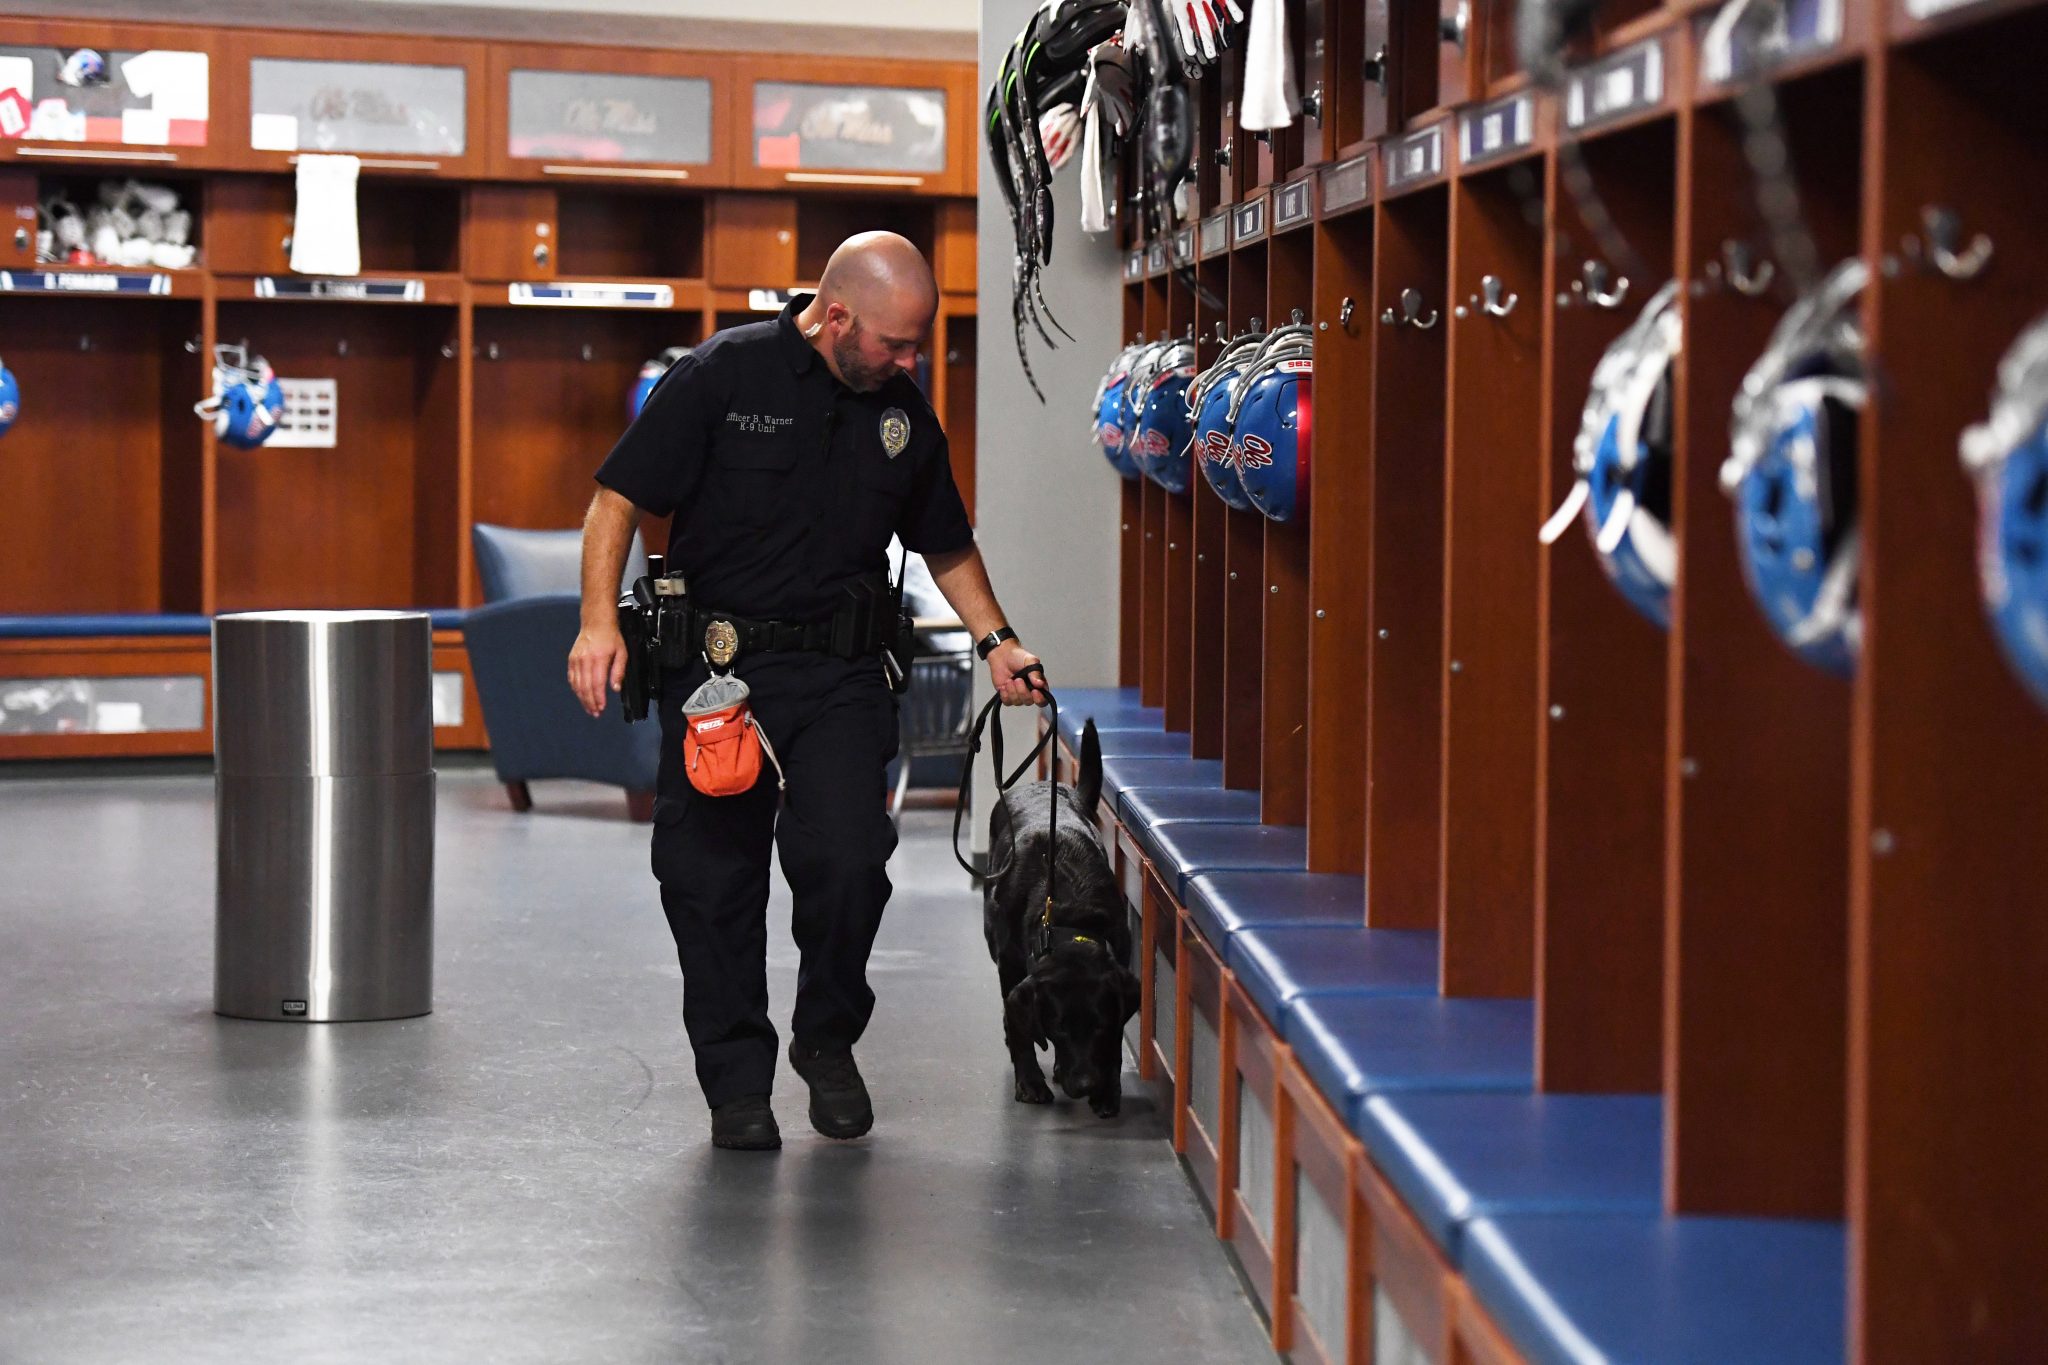 Nebula, the University of Mississippi's new police dog, searches Vaught-Hemingway Stadium and the football facilities ahead of a recent football game. The Labrador retriever is trained to find weapons, explosives and other threats. Photo by Thomas Graning/Ole Miss Digital Imaging Services